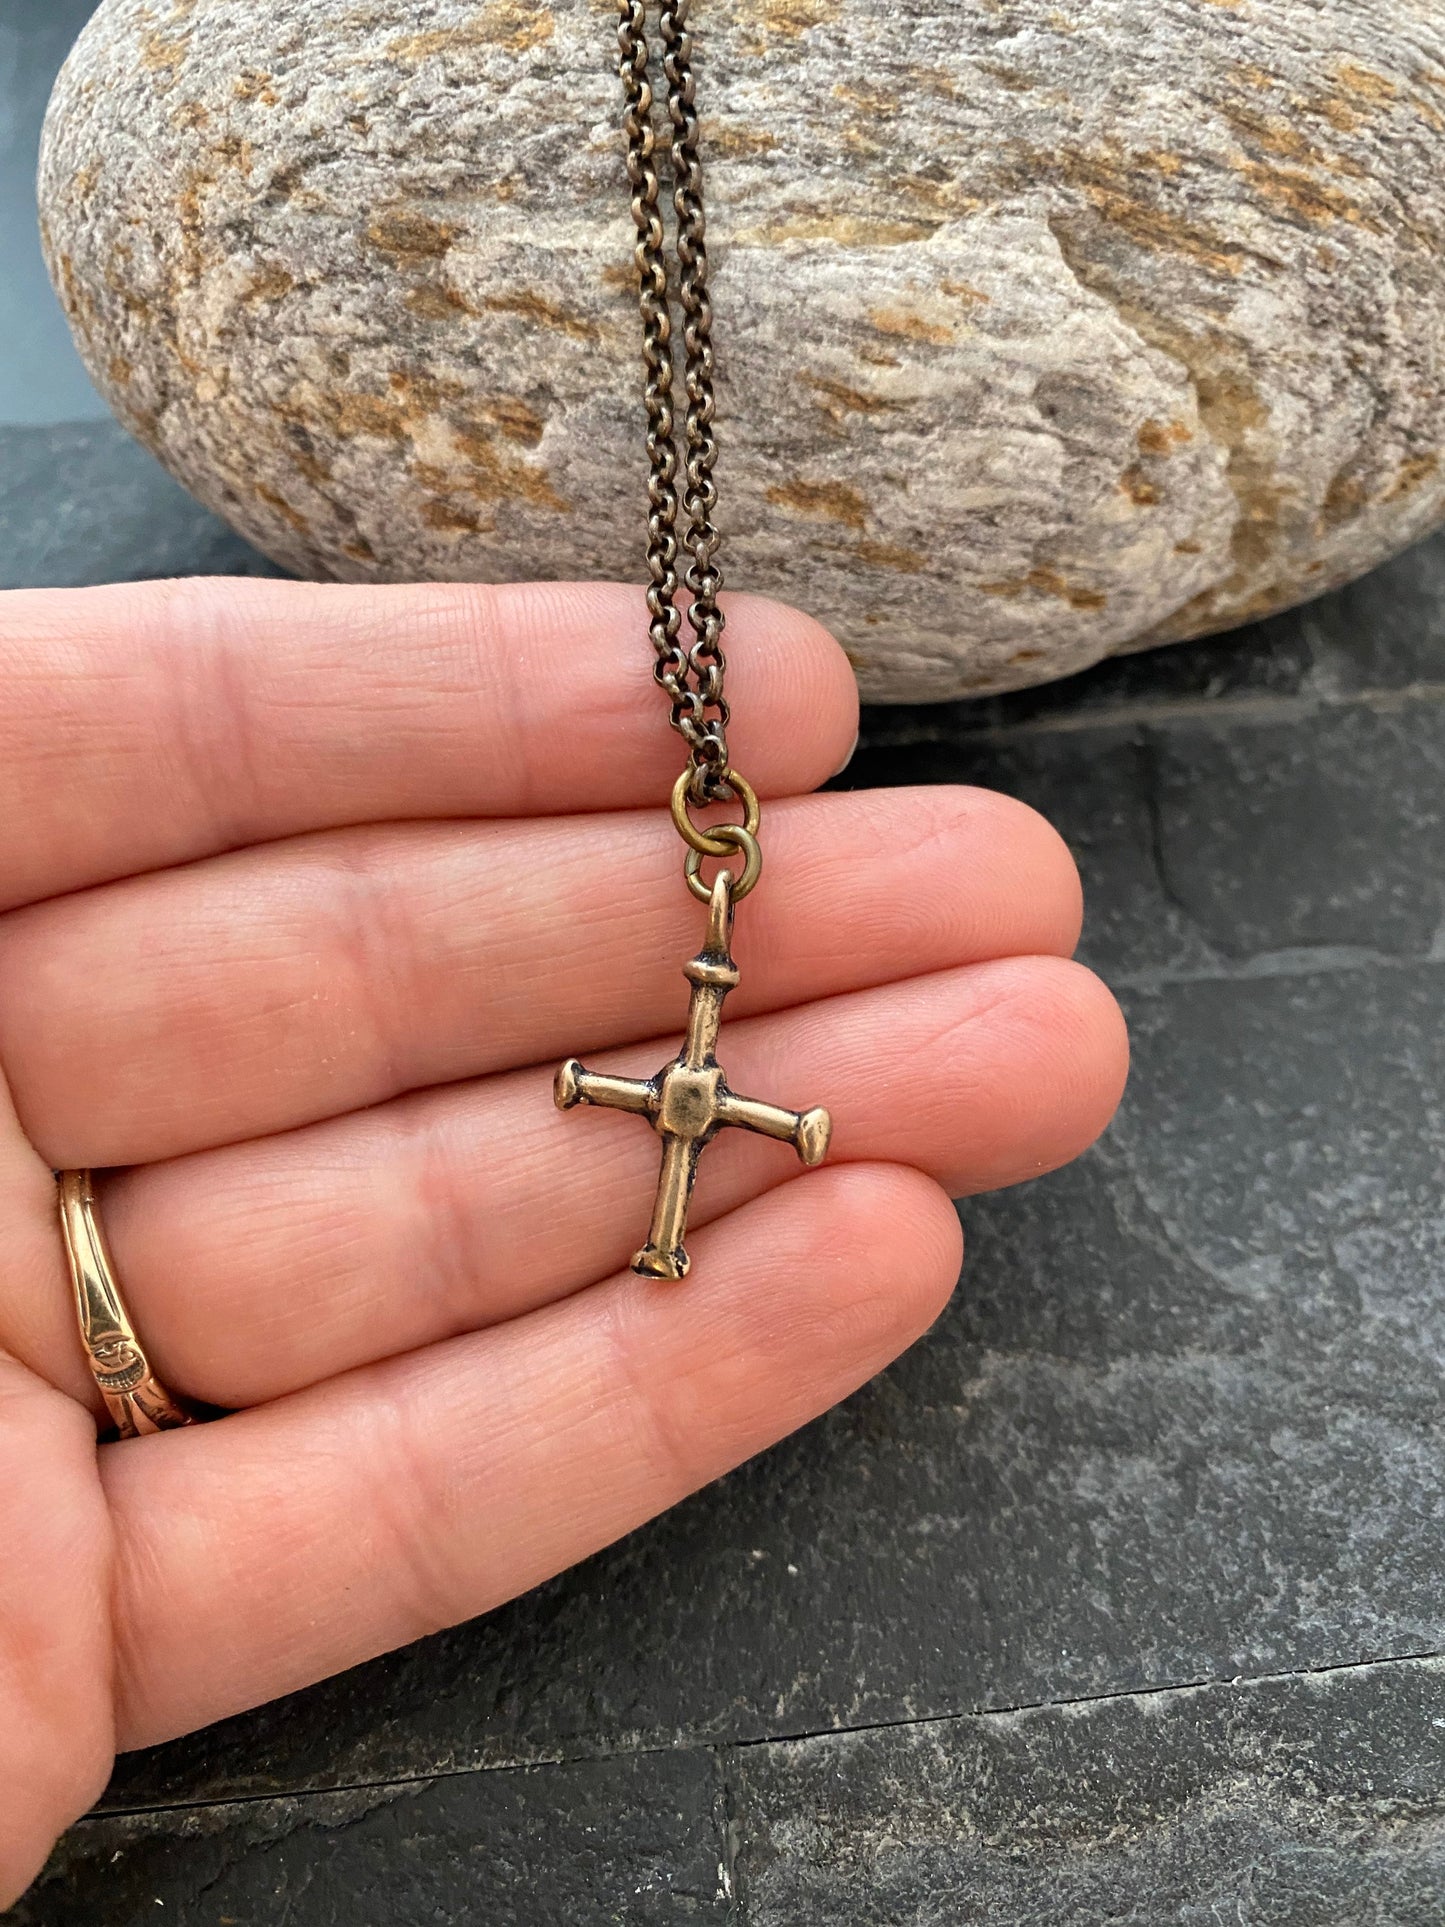 Small Cross Antiqued Solid Bronze Men's Necklace, Ancient Viking Cross, Unisex Jewelry, Brass Chain BR-040